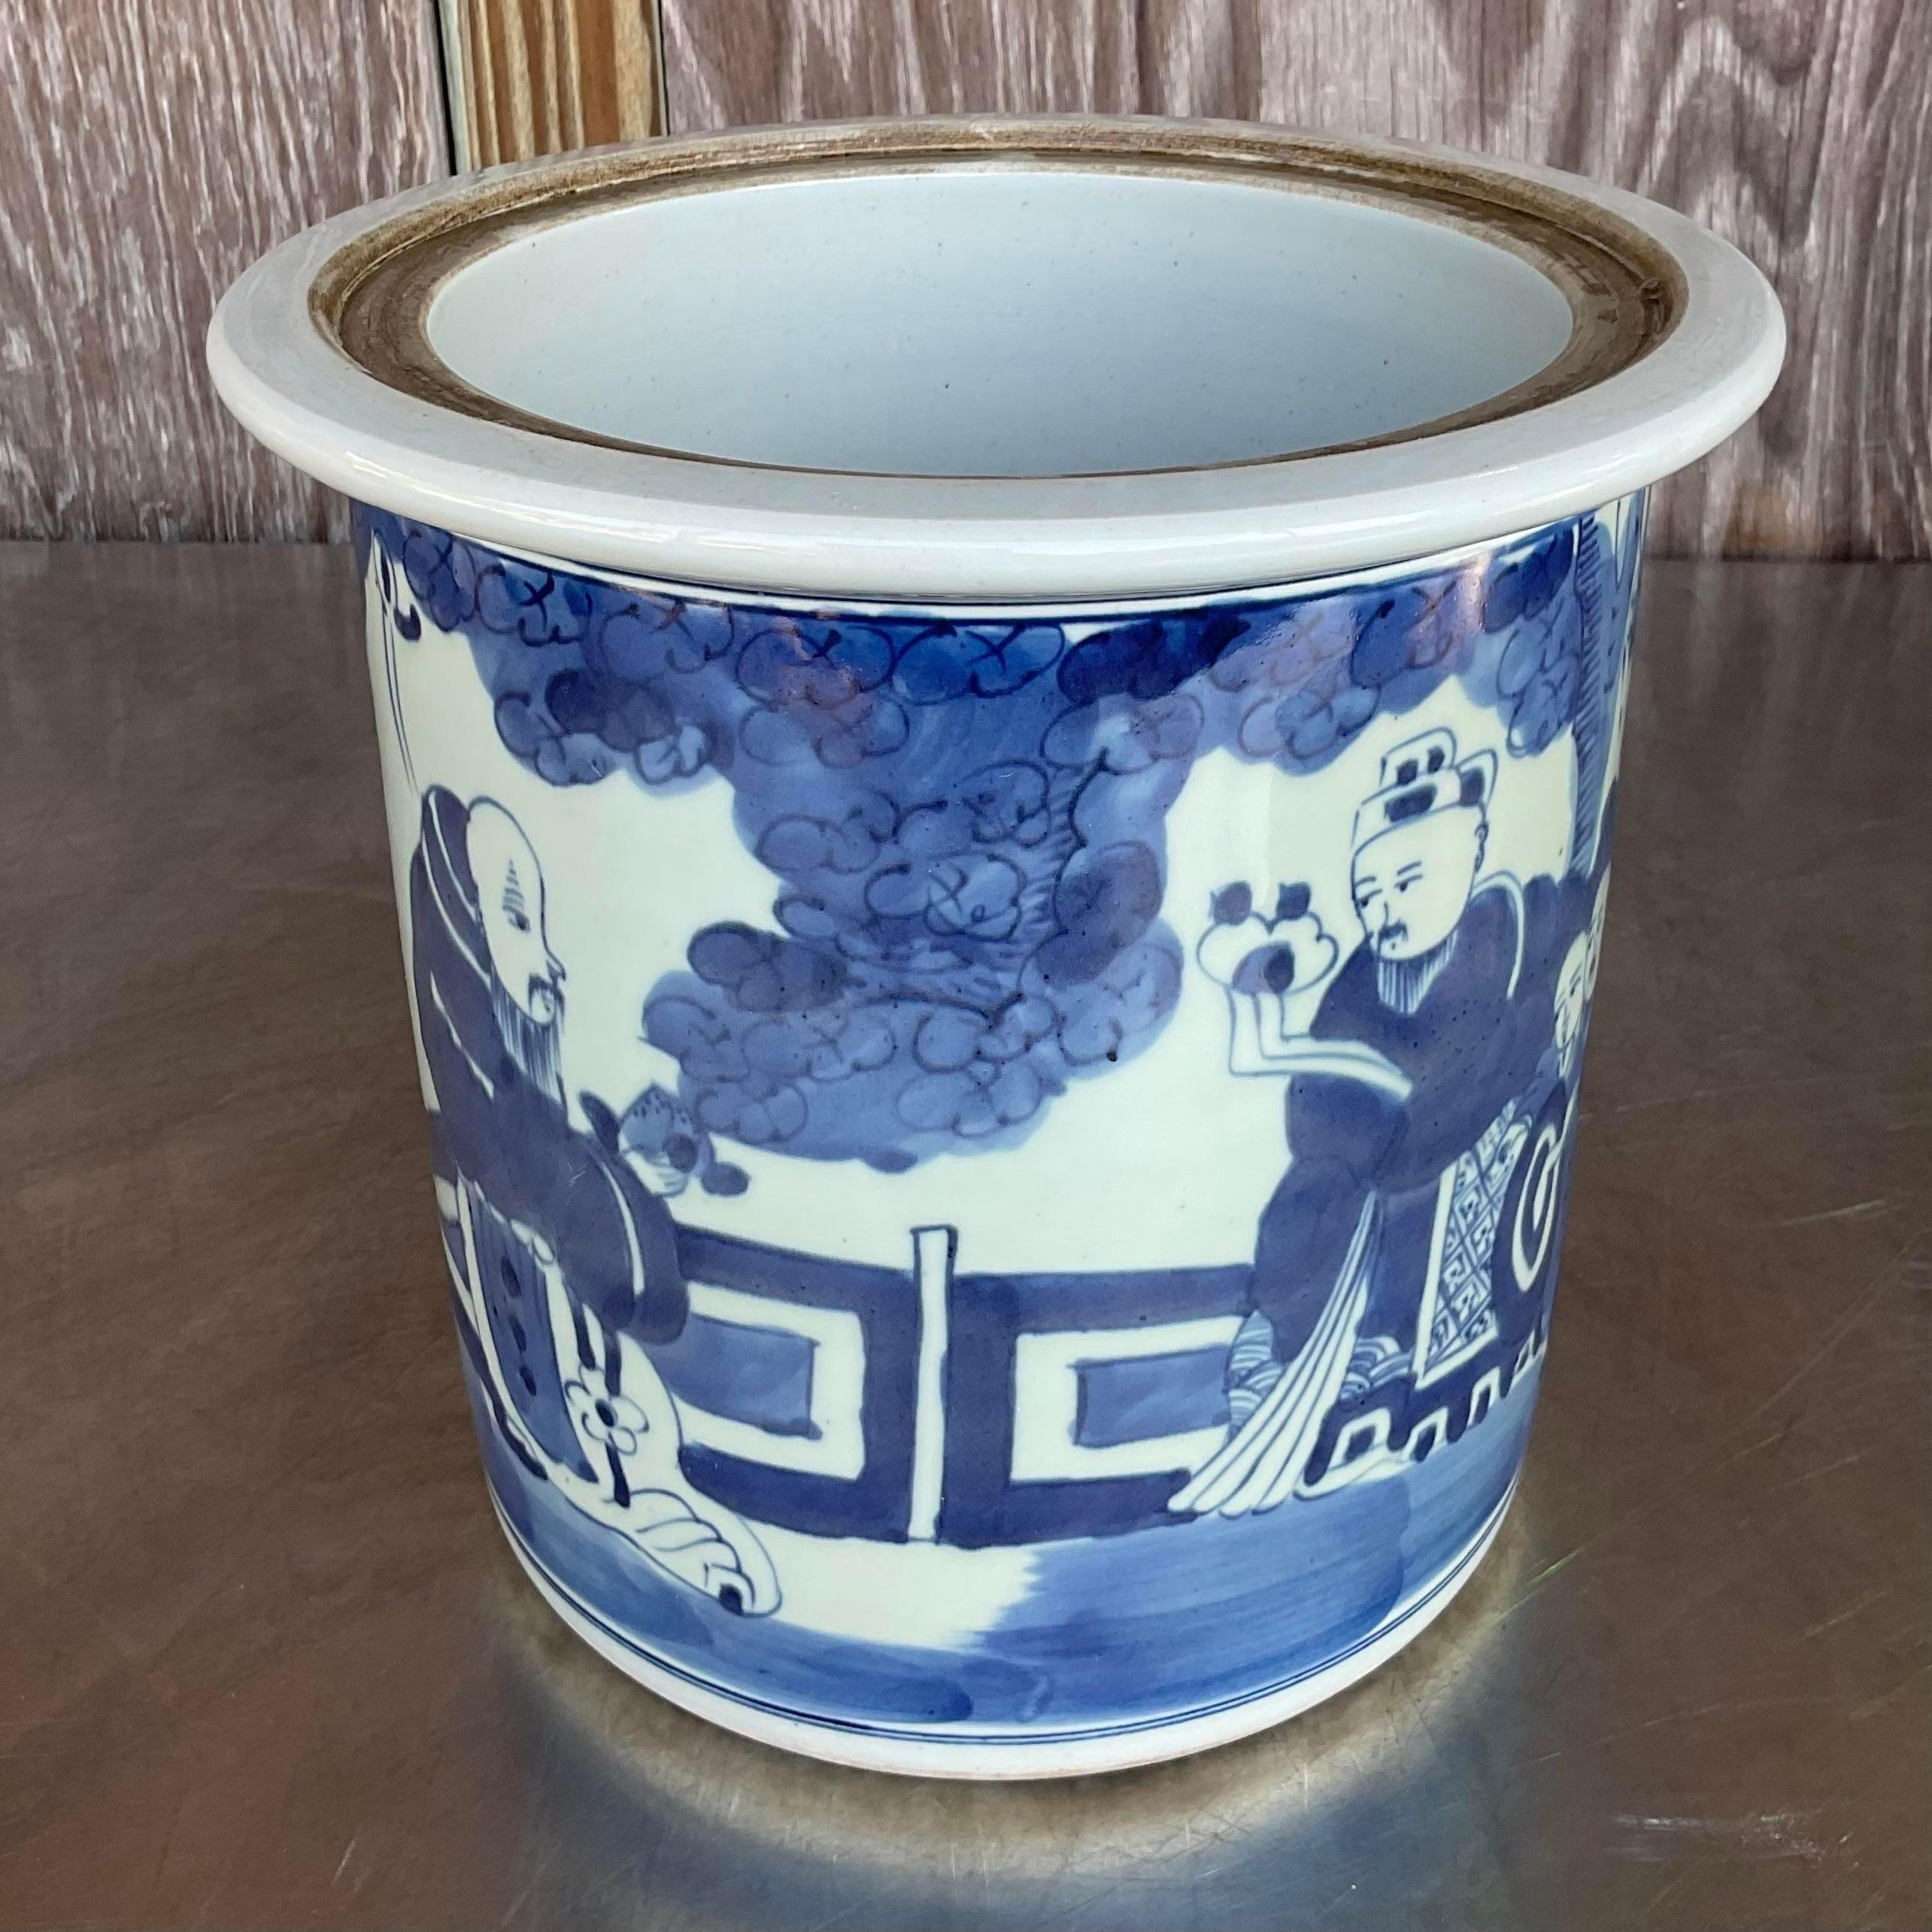 Add a touch of timeless elegance with our Vintage Asian Blue and White Lidded Jar. This exquisite piece showcases traditional Asian craftsmanship, featuring intricate blue and white designs. A classic addition that effortlessly complements American